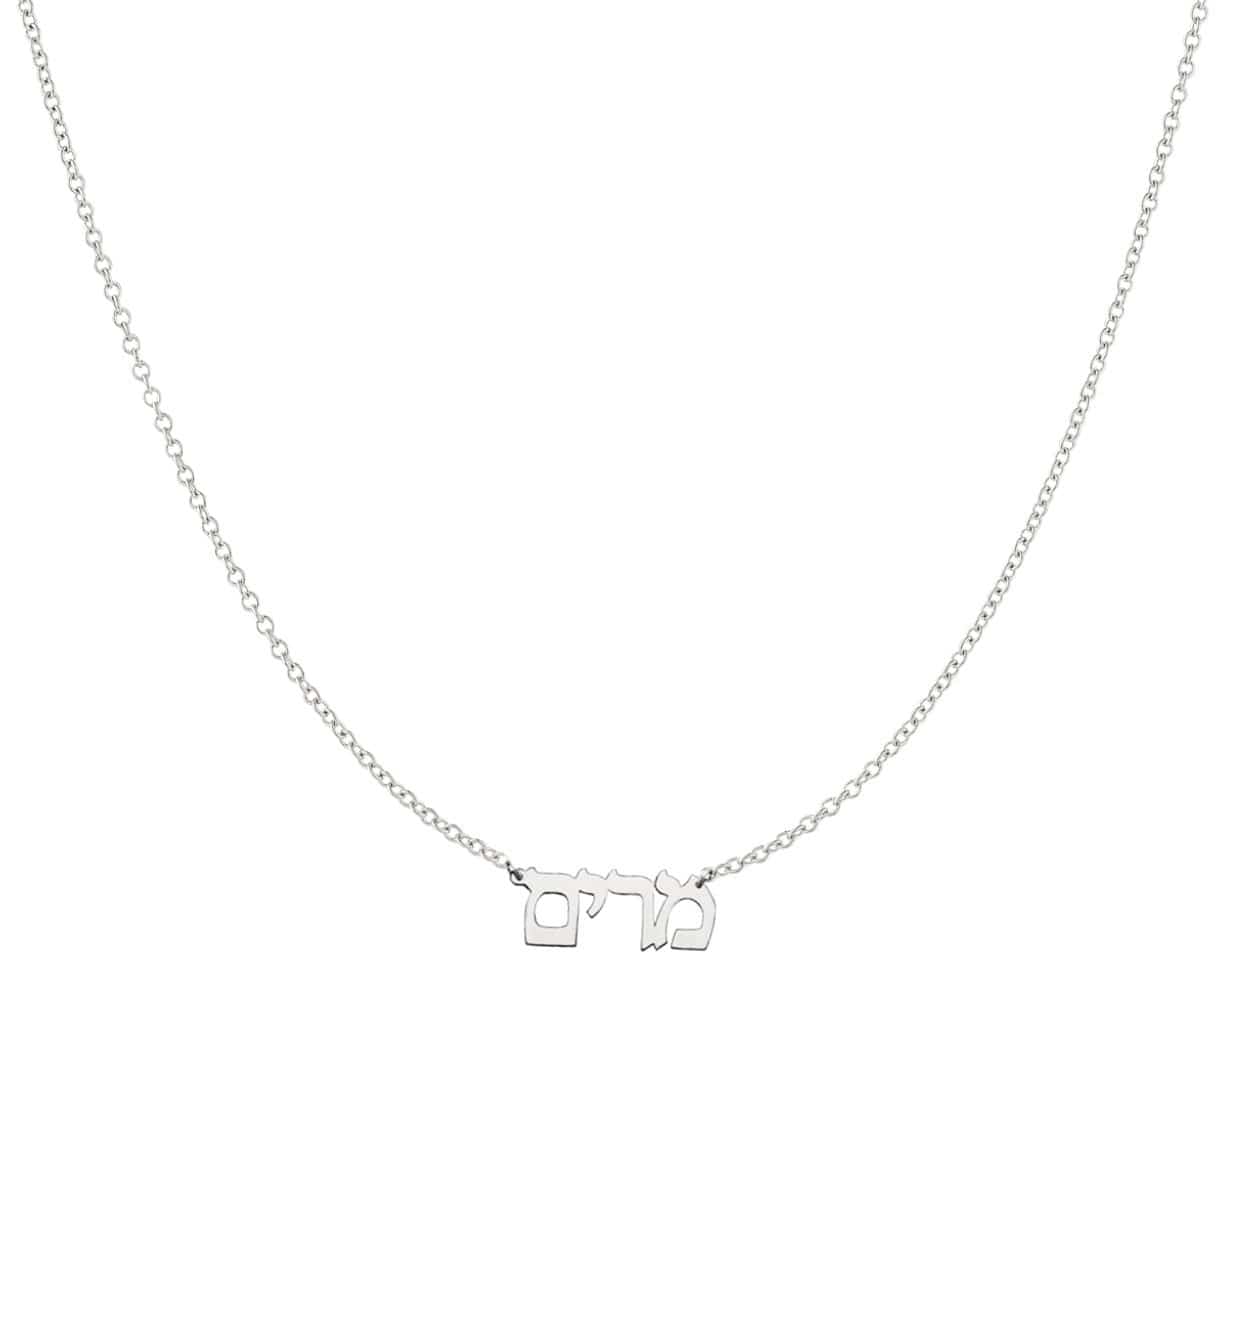 Ishees Jewelry Necklaces Hebrew Nameplate Necklace - Sterling Silver, Gold-Plated or Two-Tone